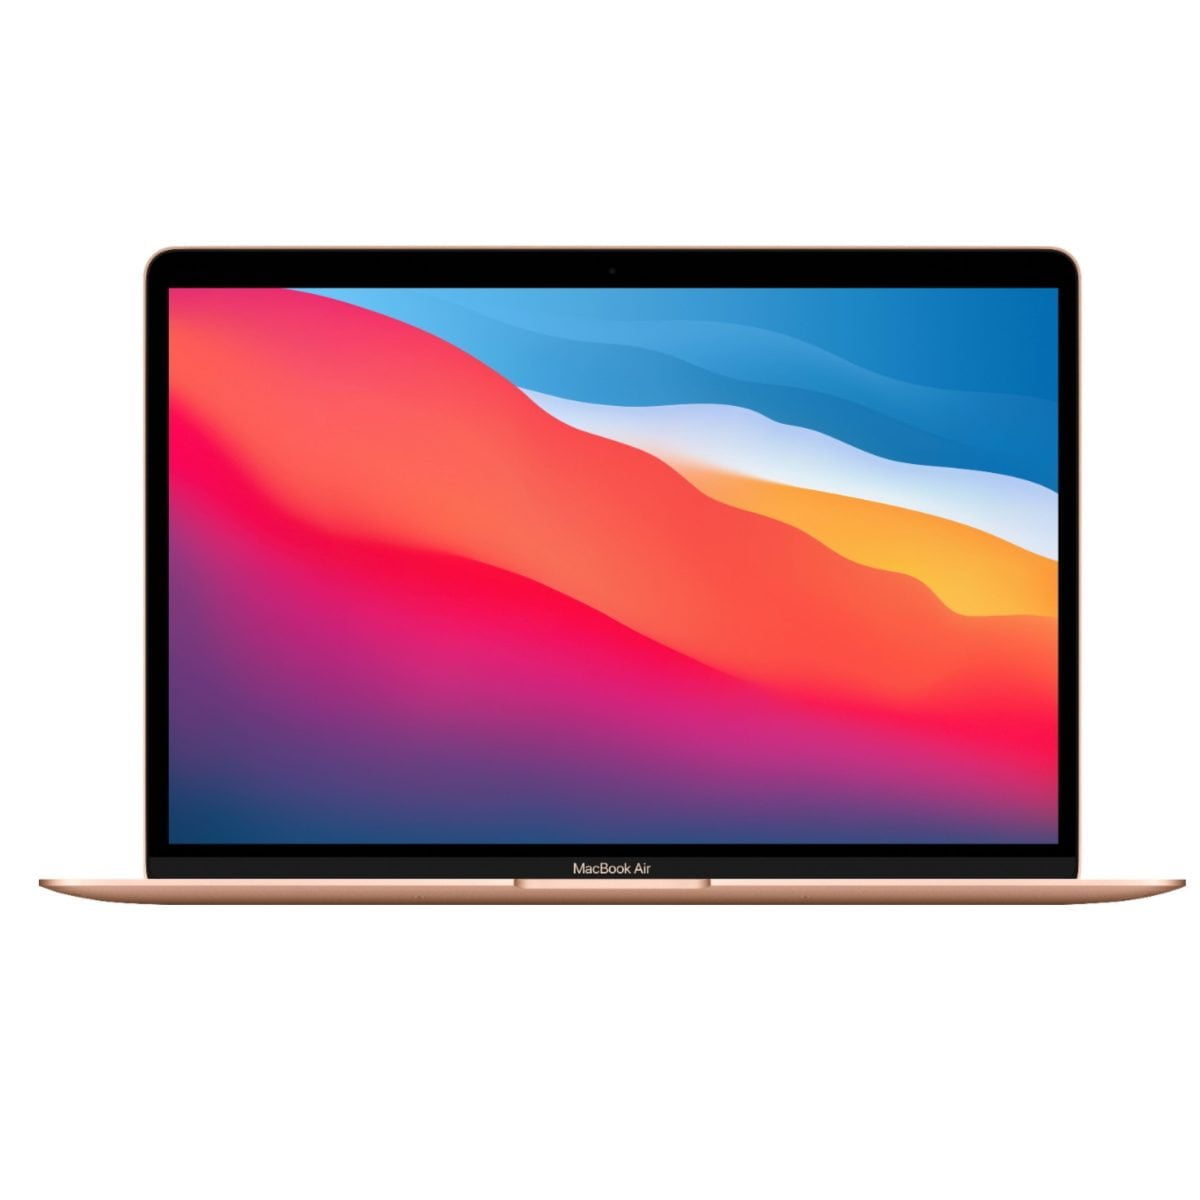 6418599 Sd Scaled Apple &Amp;Lt;H1 Class=&Amp;Quot;Heading-5 V-Fw-Regular&Amp;Quot;&Amp;Gt;Macbook Air 13&Amp;Quot; Laptop - Apple M1 Chip - 8Gb Memory - 256Gb Ssd (Latest Model) - Gold (English Keyboard)&Amp;Lt;/H1&Amp;Gt; Https://Www.youtube.com/Watch?V=Hs1Hols4Sd0 Apple’s Thinnest And Lightest Notebook Gets Supercharged With The Apple M1 Chip. Tackle Your Projects With The Blazing-Fast 8-Core Cpu. Take Graphics-Intensive Apps And Games To The Next Level With The 7-Core Gpu. And Accelerate Machine Learning Tasks With The 16-Core Neural Engine. All With A Silent, Fanless Design And The Longest Battery Life Ever — Up To 18 Hours. Macbook Air. Still Perfectly Portable. Just A Lot More Powerful. Macbook Air 13 Macbook Air 13&Amp;Quot; Laptop - Apple M1 Chip - 8Gb Memory - 256Gb Ssd (Mgnd3) - Gold